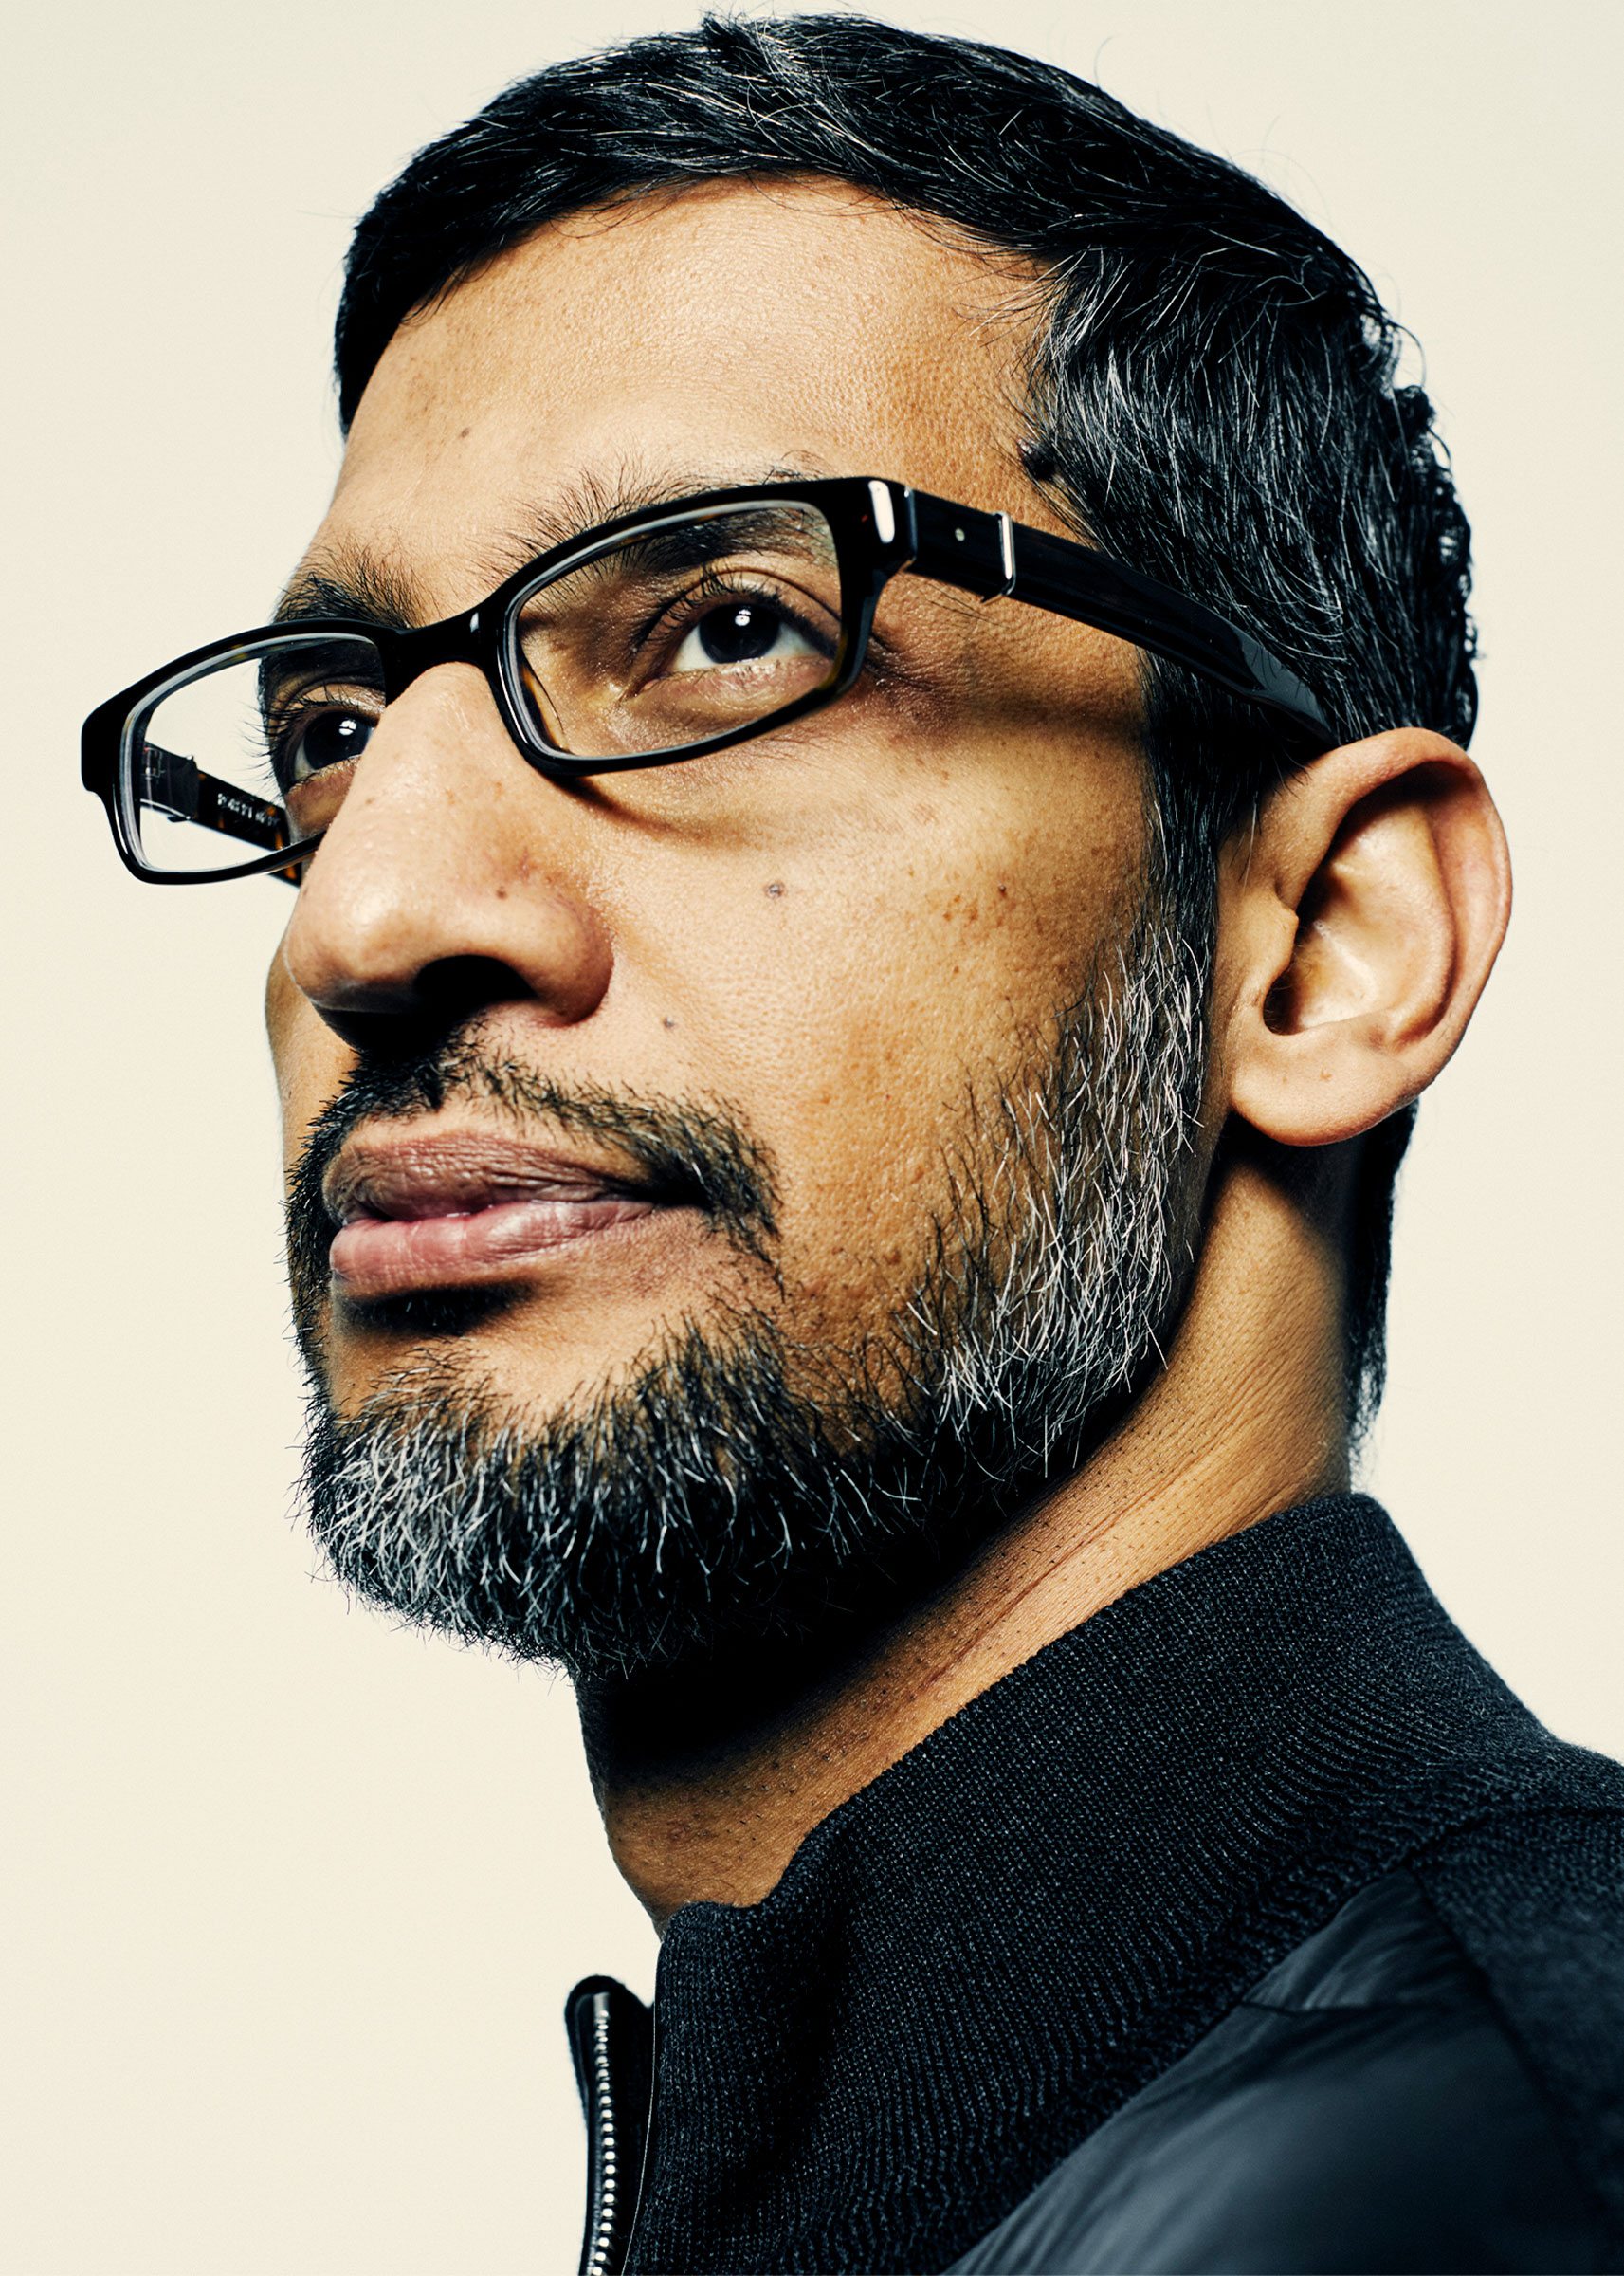 Pichai, who joined Google in 2004, was named CEO of Alphabet in December 2019 (Erik Tanner)